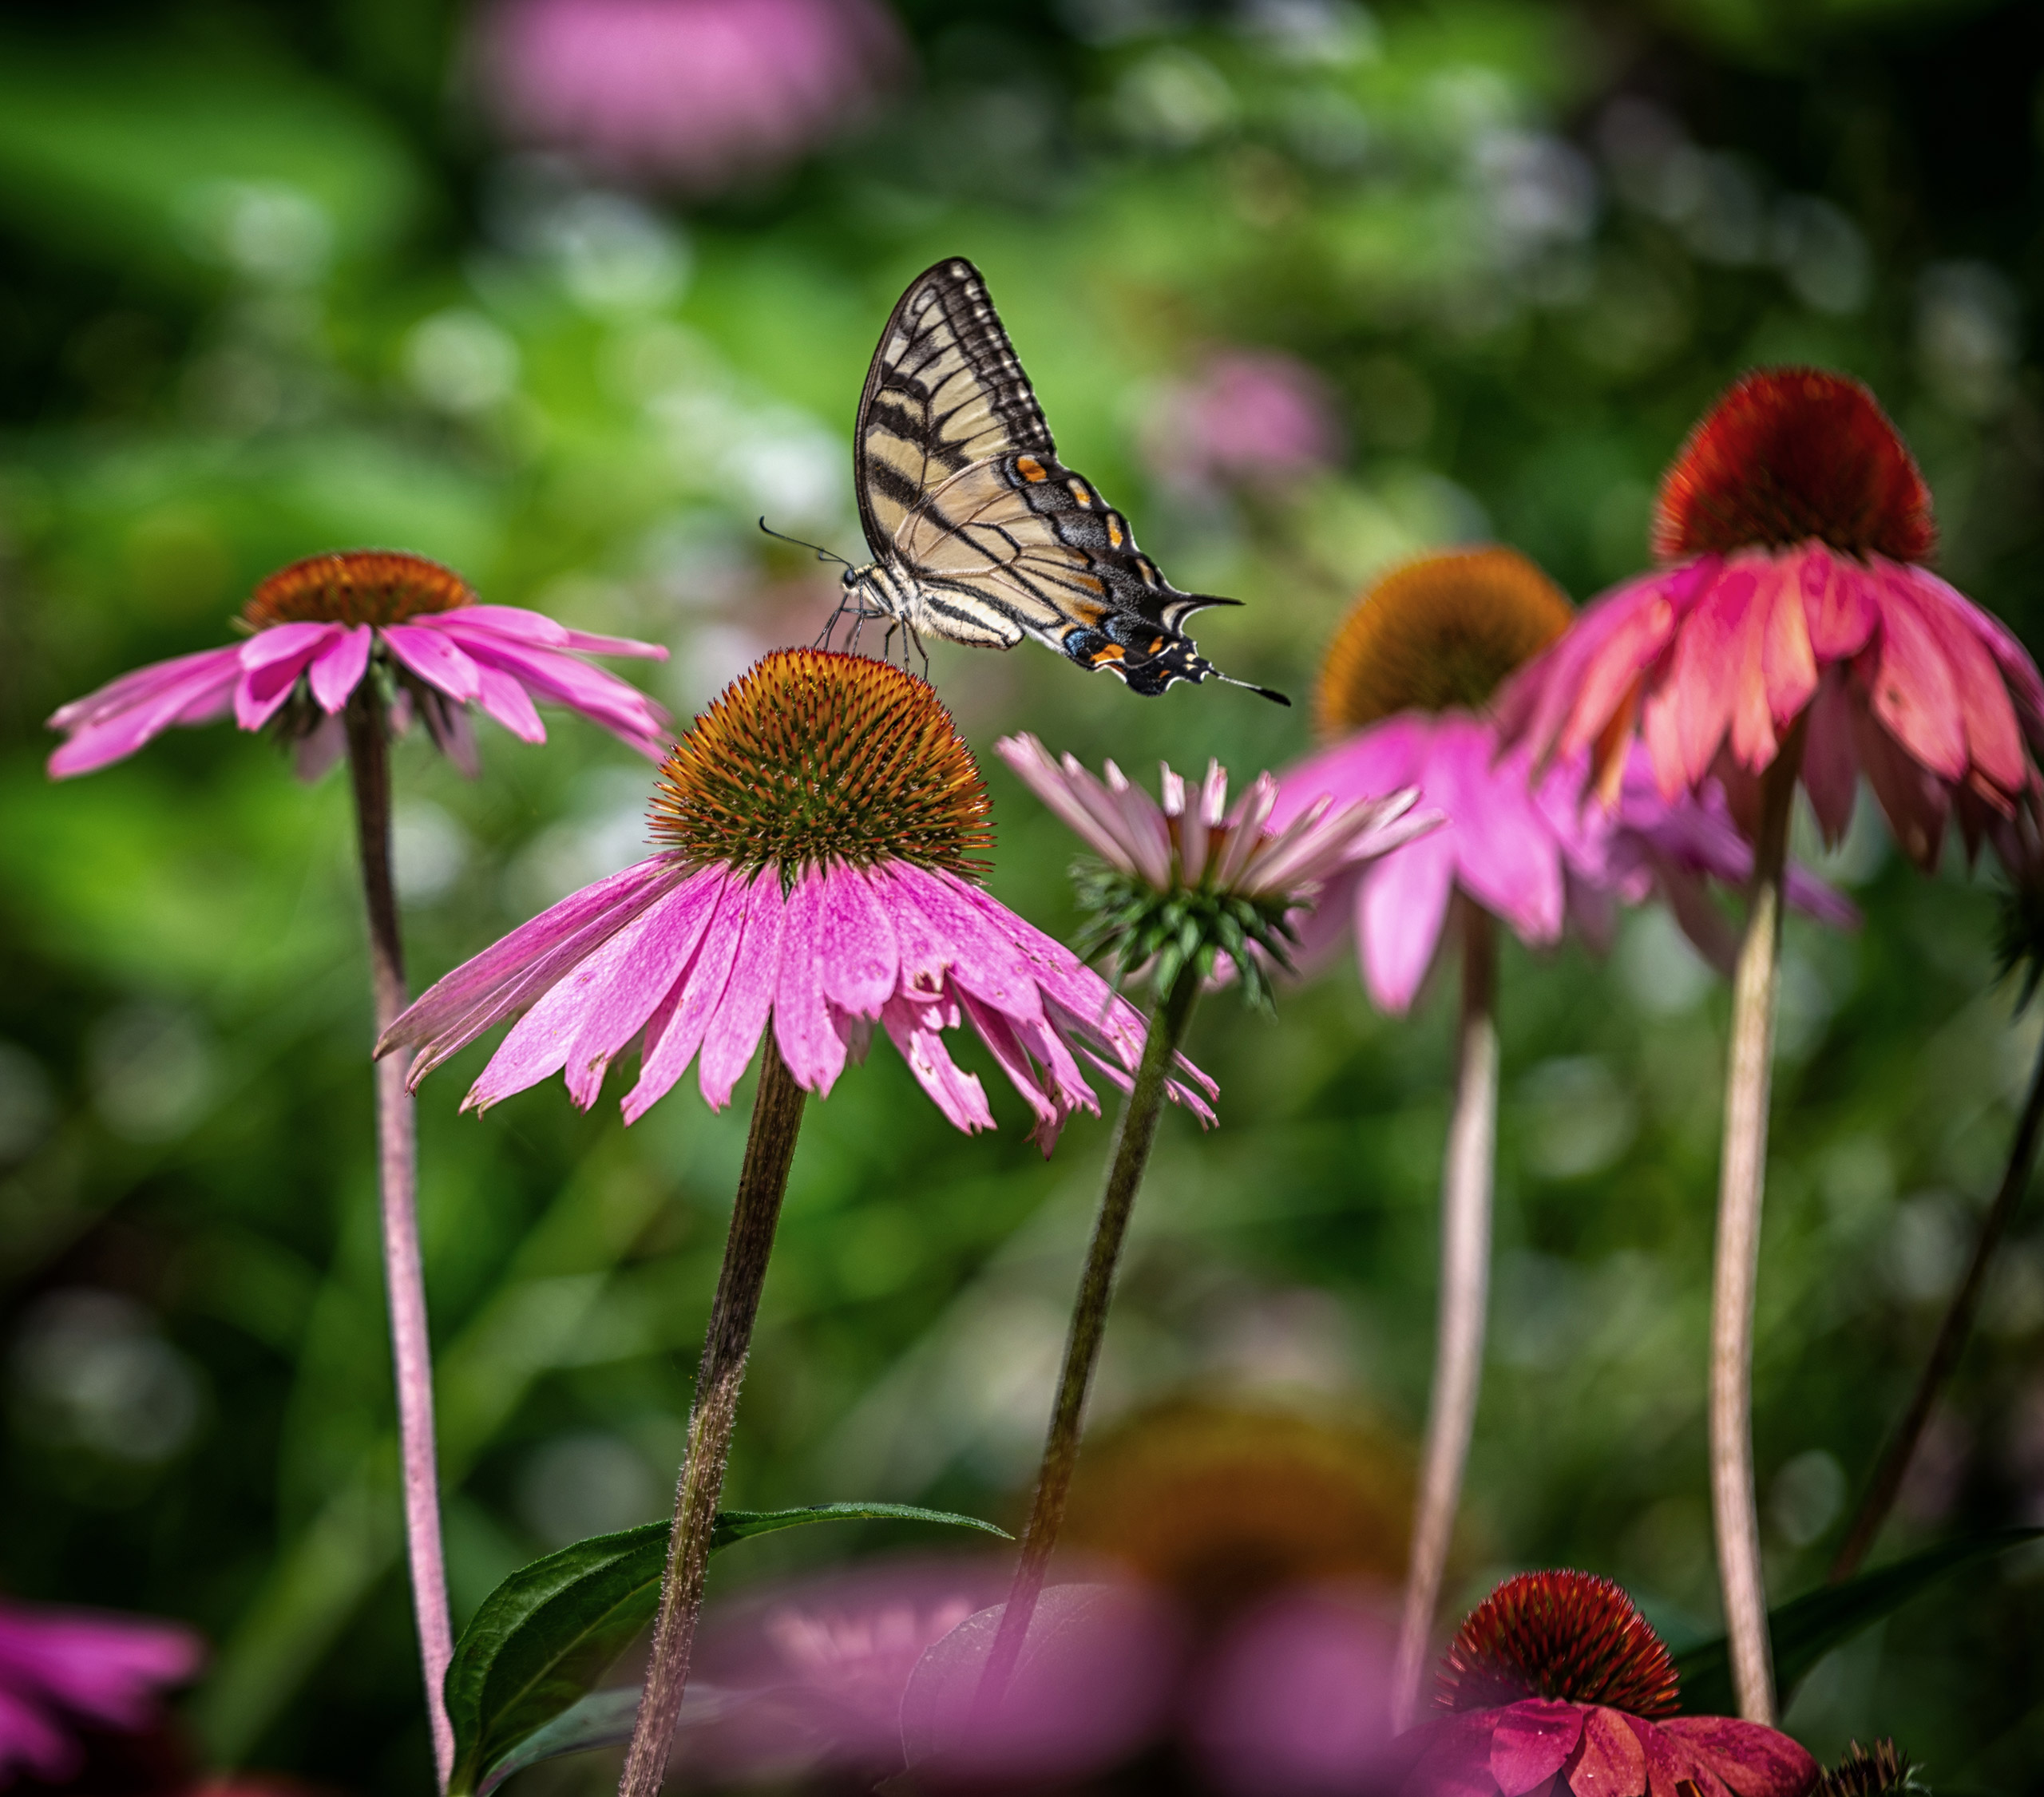 Echinacea, purple coneflower, blossoms with a butterfly alighting on the center stigma